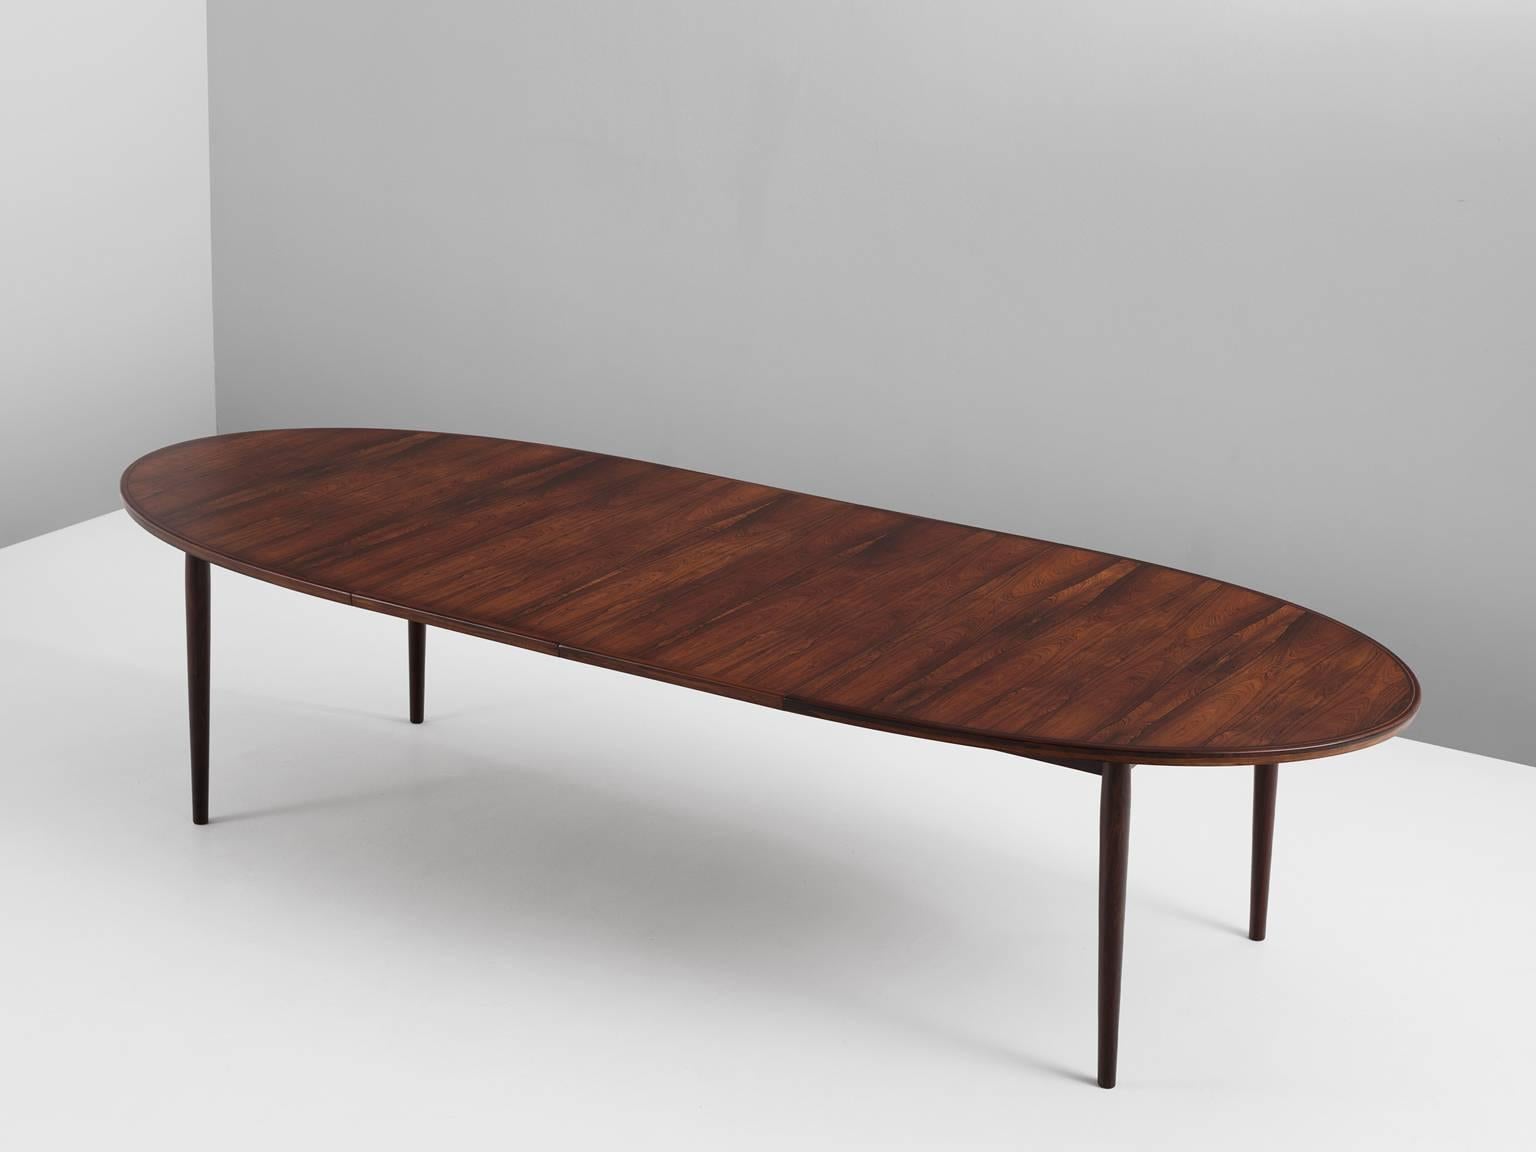 Dining table in rosewood by Arne Vodder for Sibast, Denmark, 1950s.

Large oval table in rosewood. This extendable table comes with two leaves, which gives it an extra length of one meter. The design is basic and modest. Four cylindrical tapered